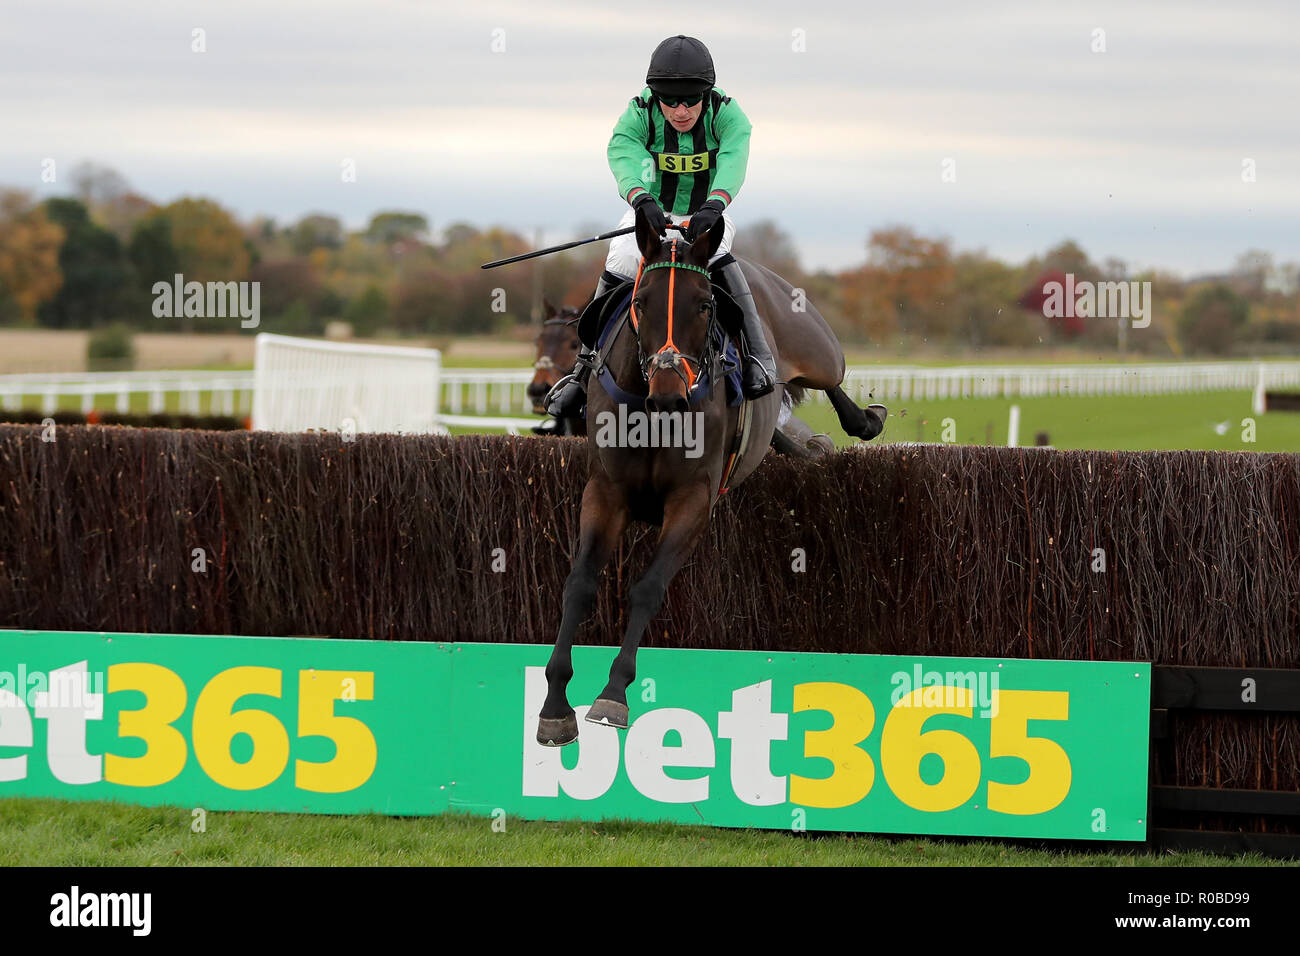 Jonathan Burke on Nightfly go on to win the Danny Megson 40th Birthday Celebration Handicap Chase On Racing UK Handicap Chase during day two of The Bet365 Meeting at Wetherby Racecourse, Wetherby. Stock Photo